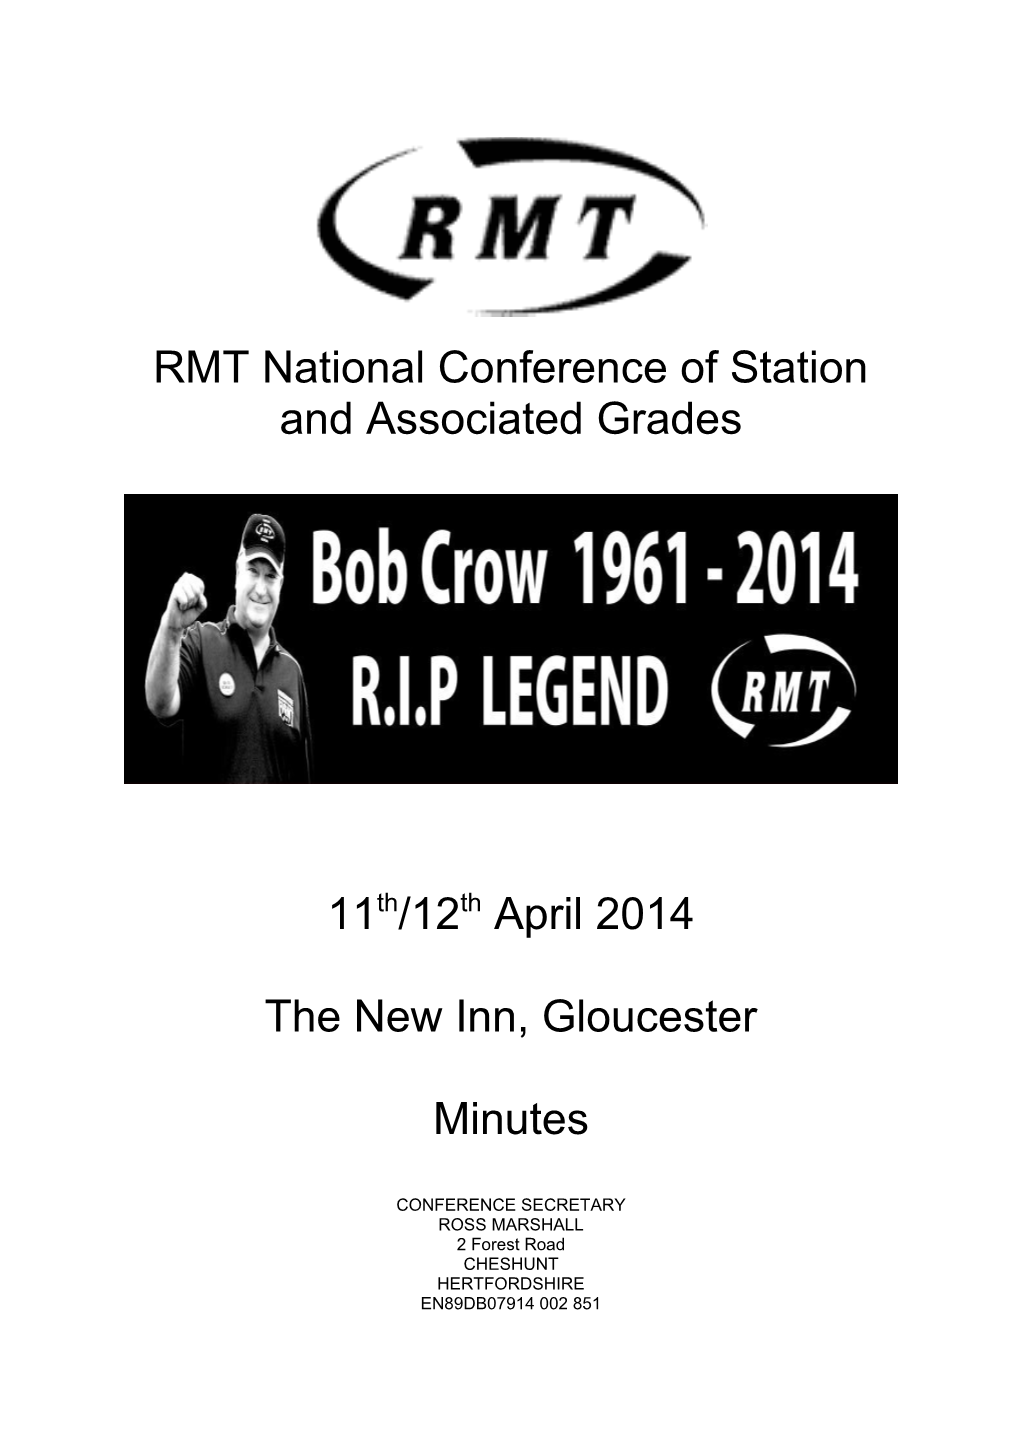 RMT National Conference of Station and Associated Grades